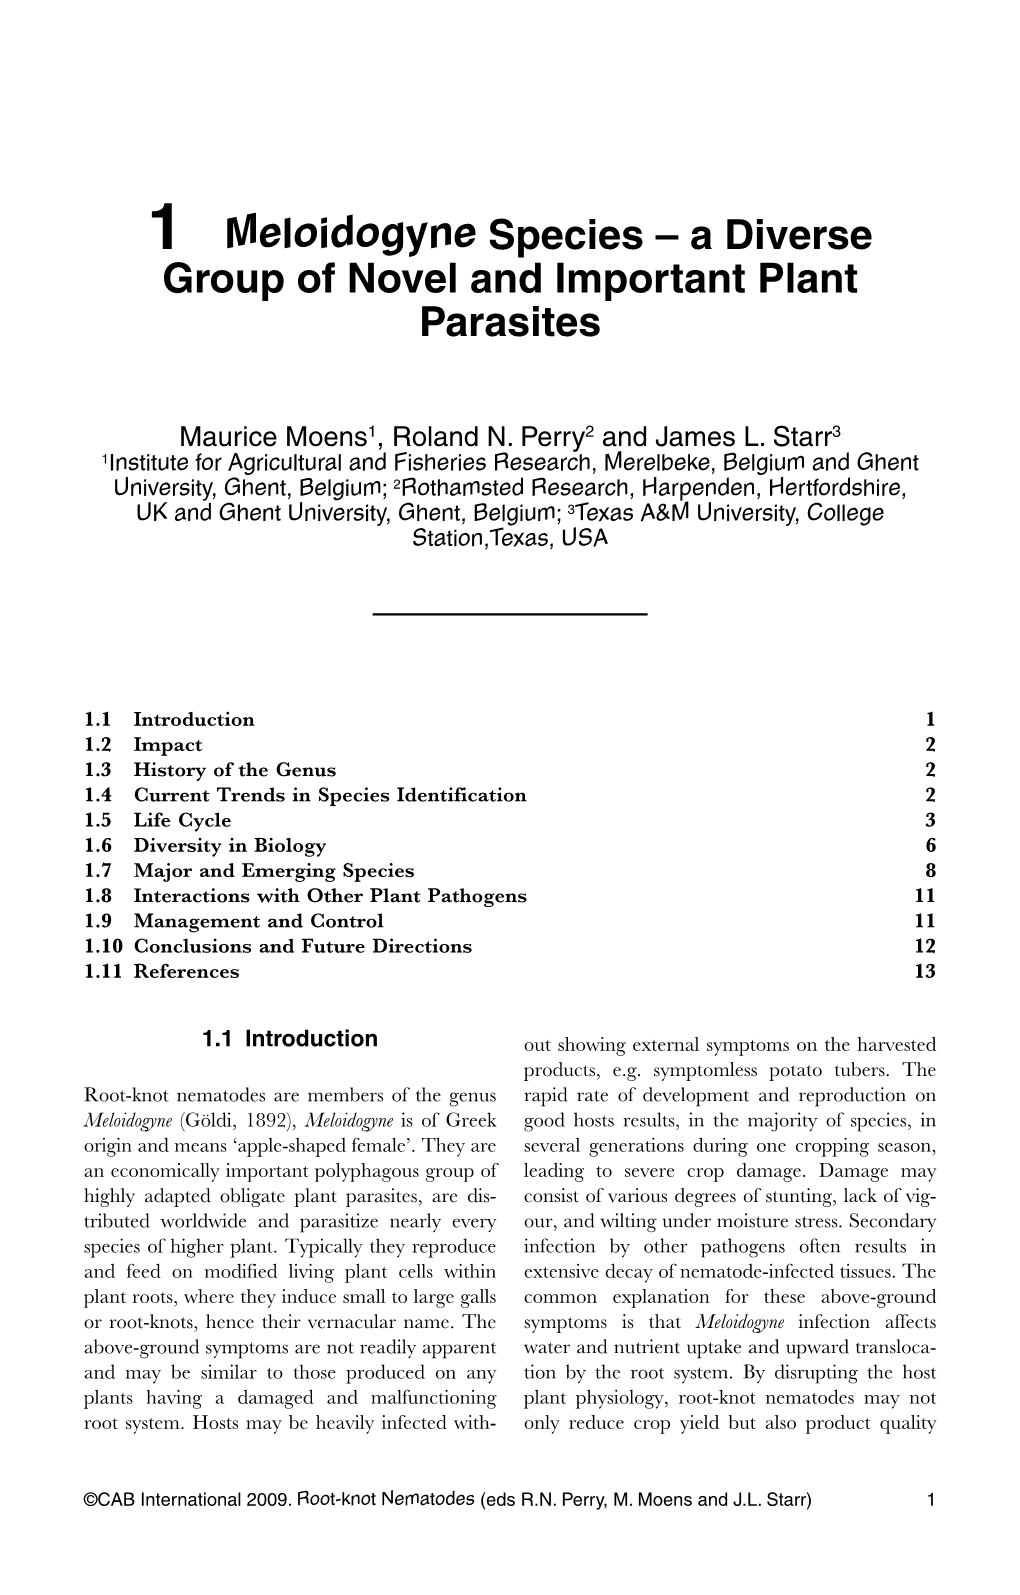 1 Meloidogyne Species – a Diverse Group of Novel and Important Plant Parasites